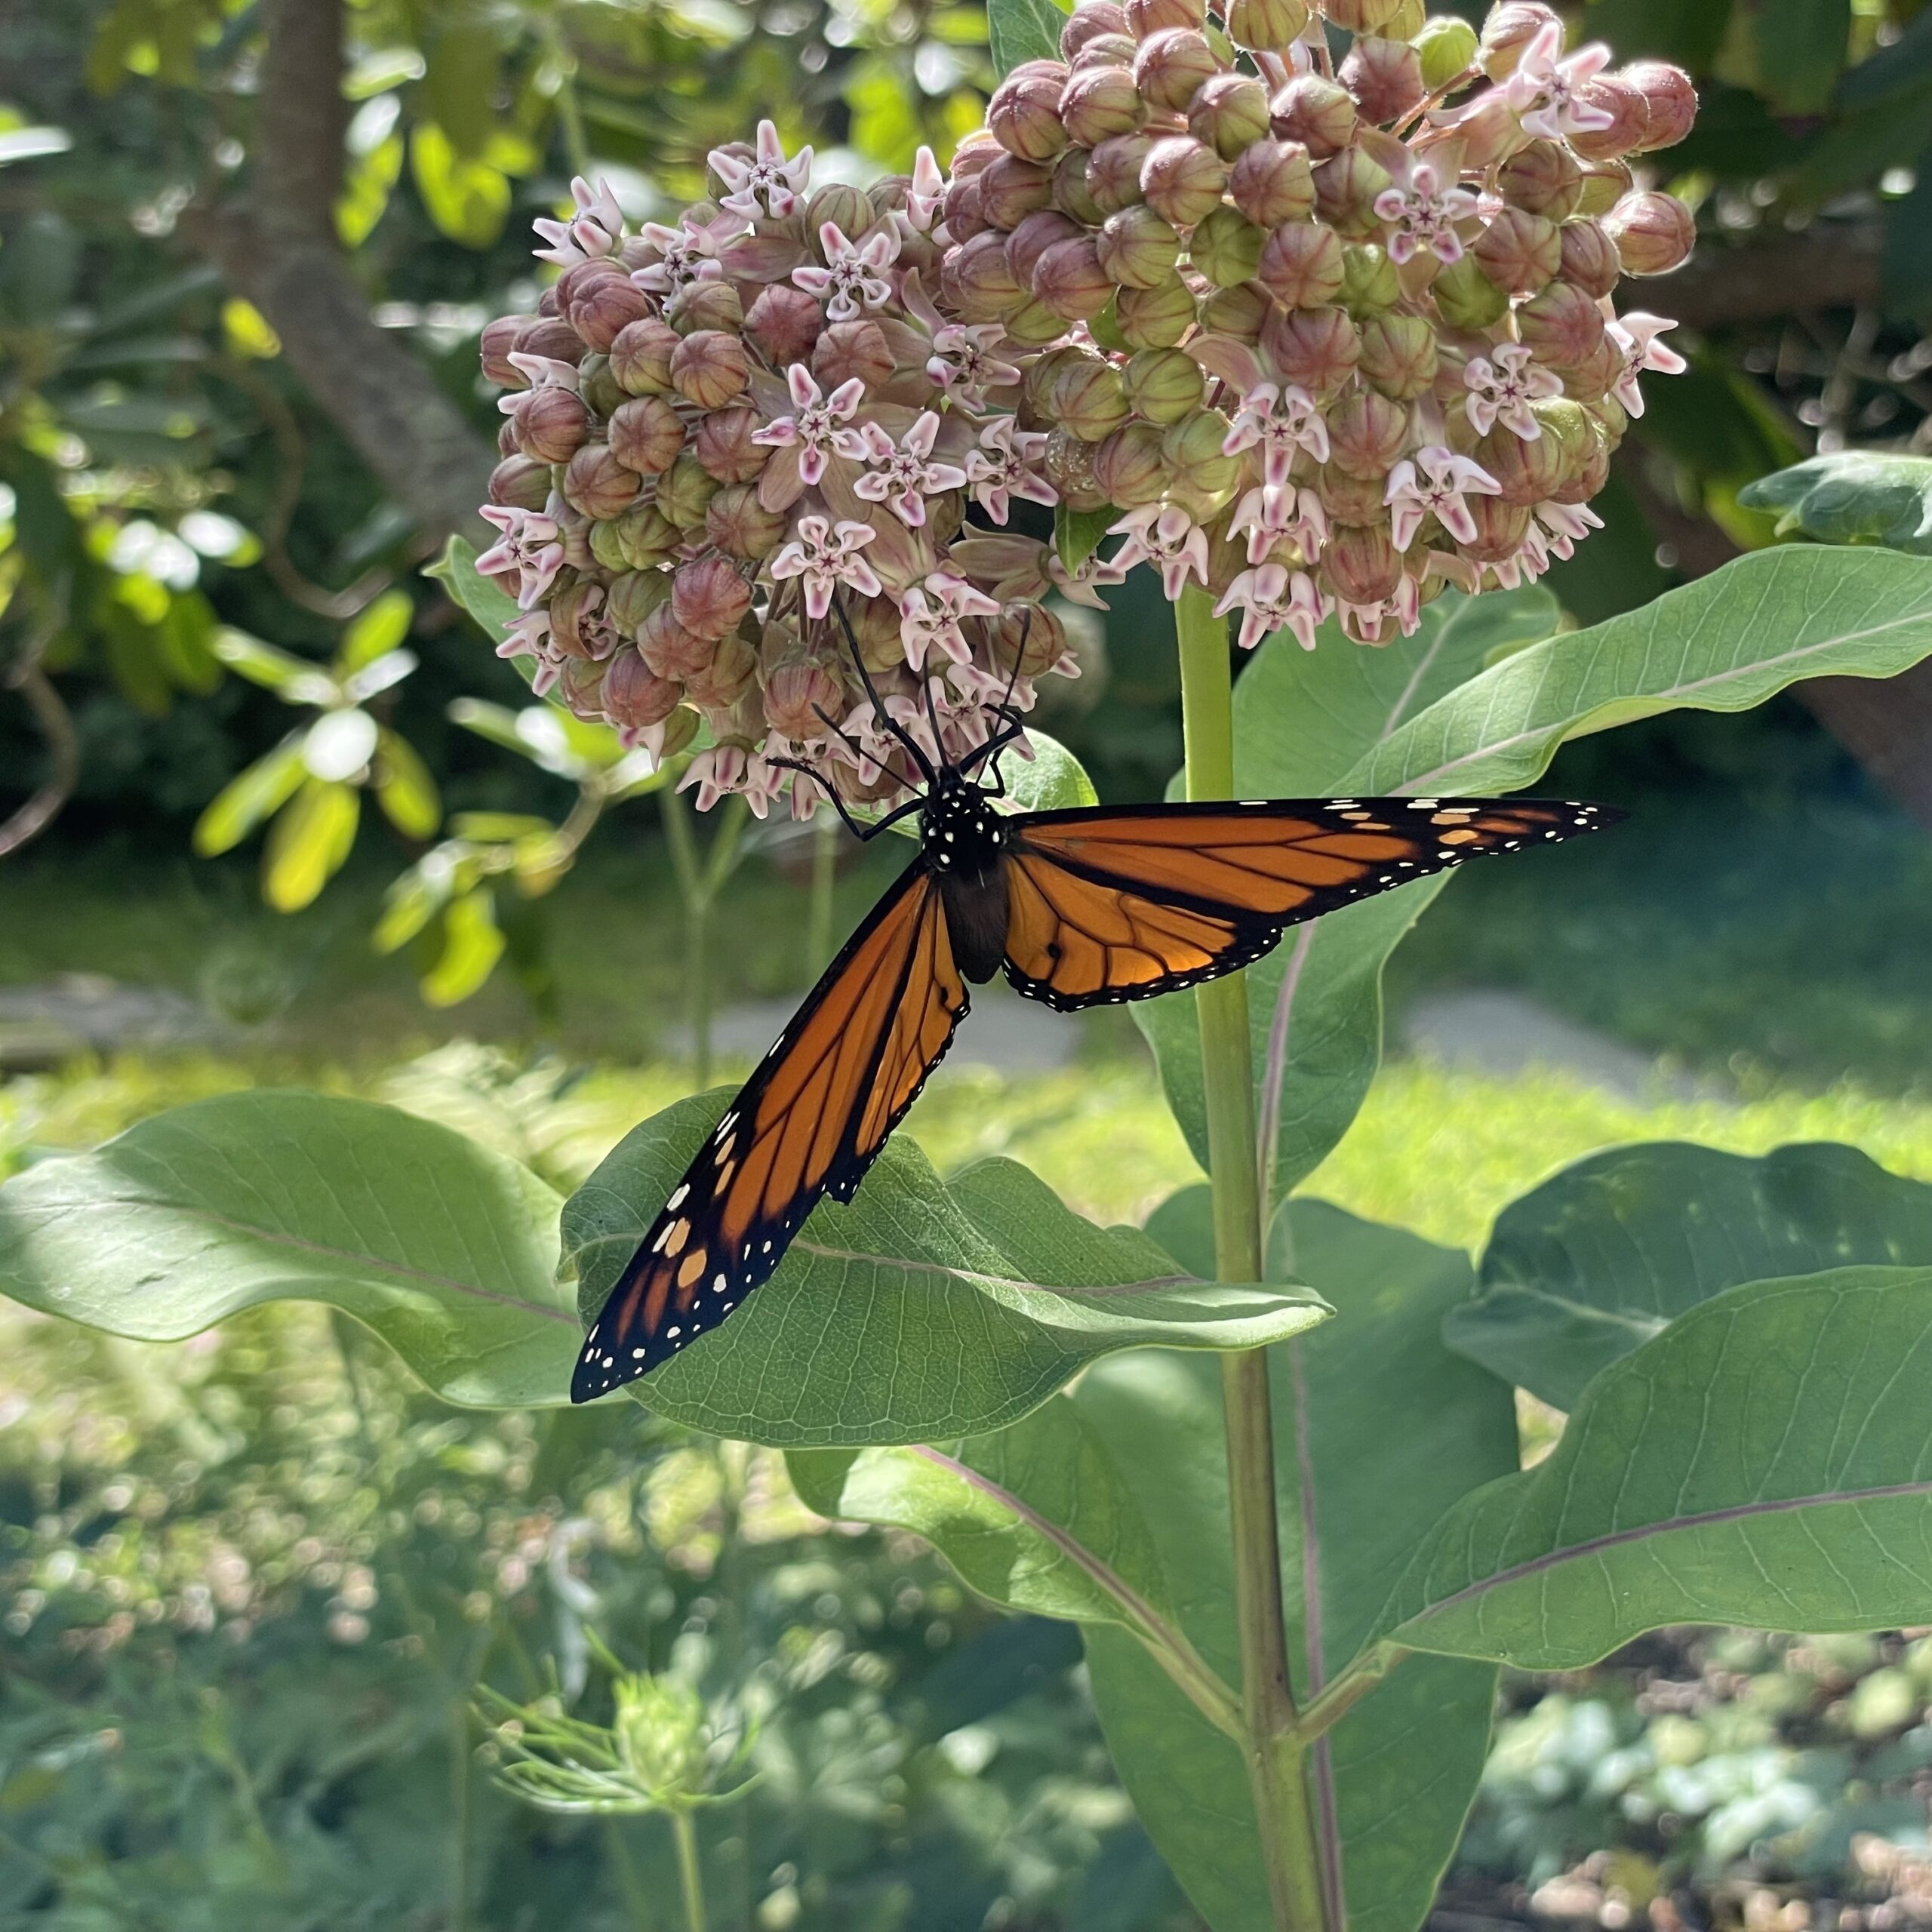 A butterfly lands on a common milkweed in the garden of Leonard Green, co-founder of ChangeHampton.